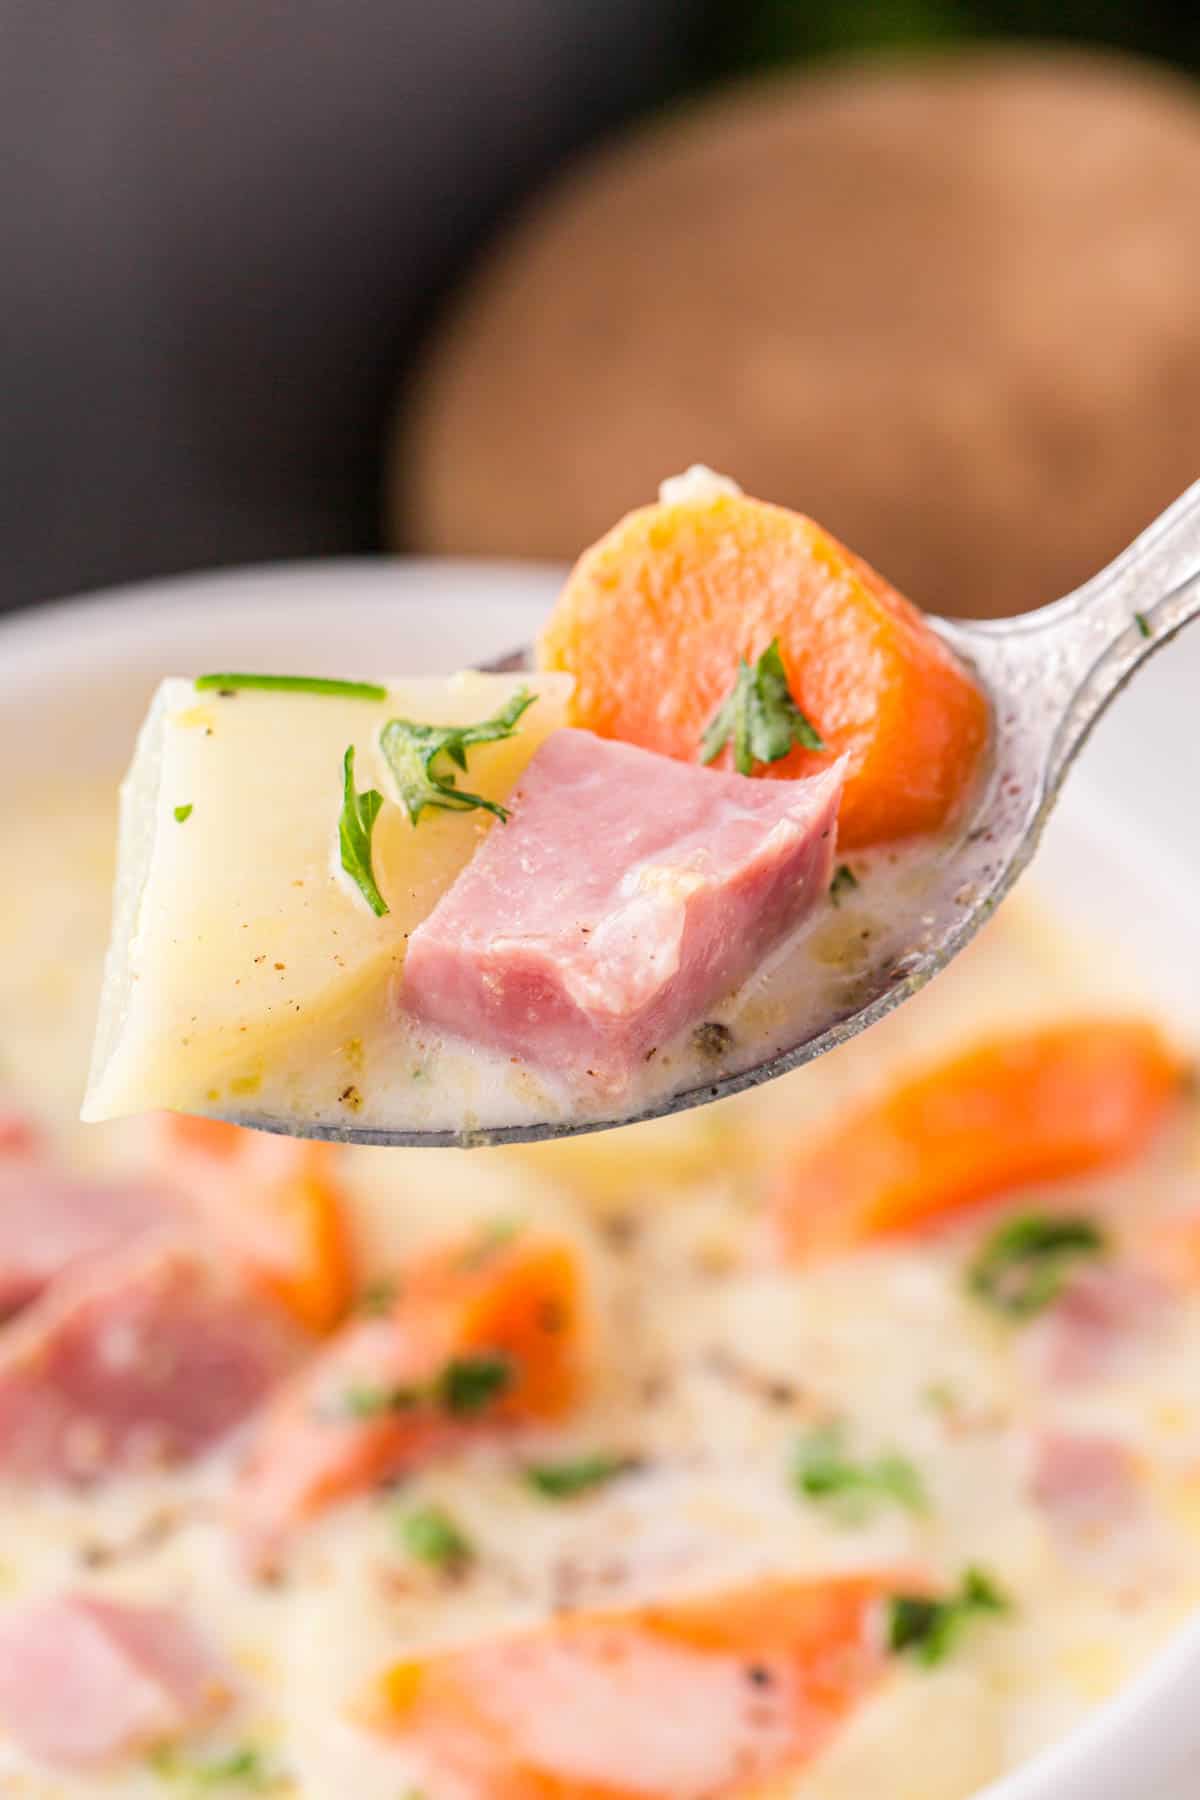 Ham and Potato Soup is a delicious creamy soup loaded with diced ham, sliced carrots and cubed potatoes.